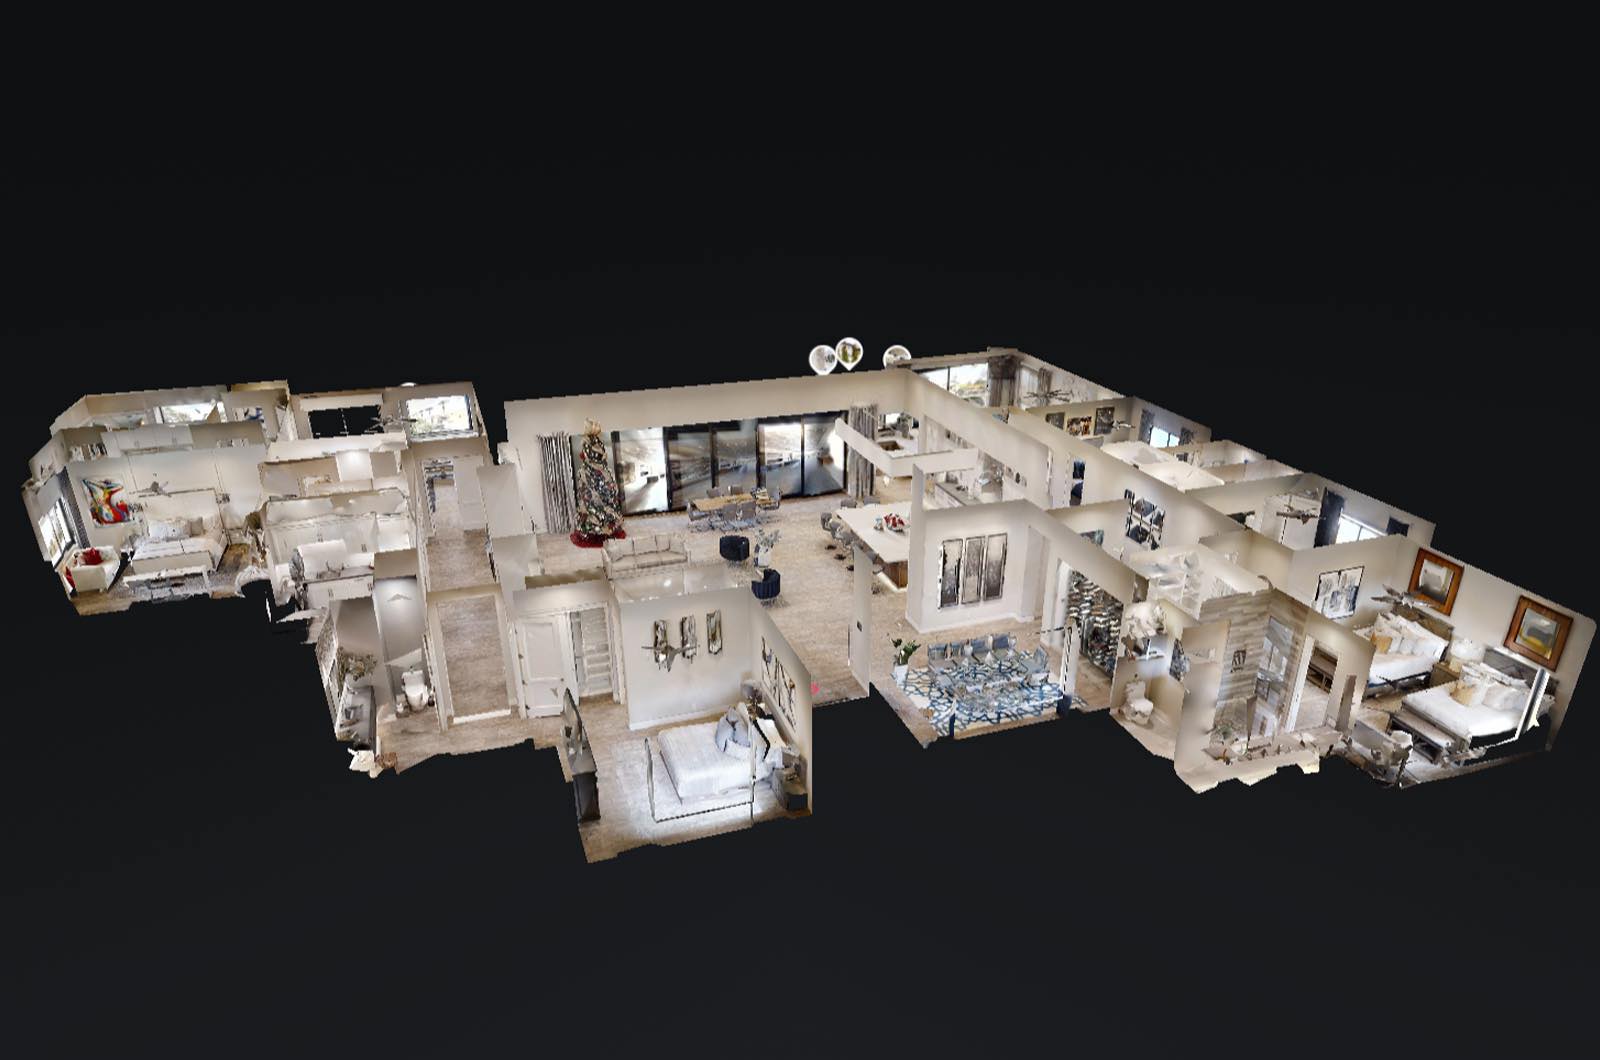 Matterport 3D Tours for Remote Property Viewings